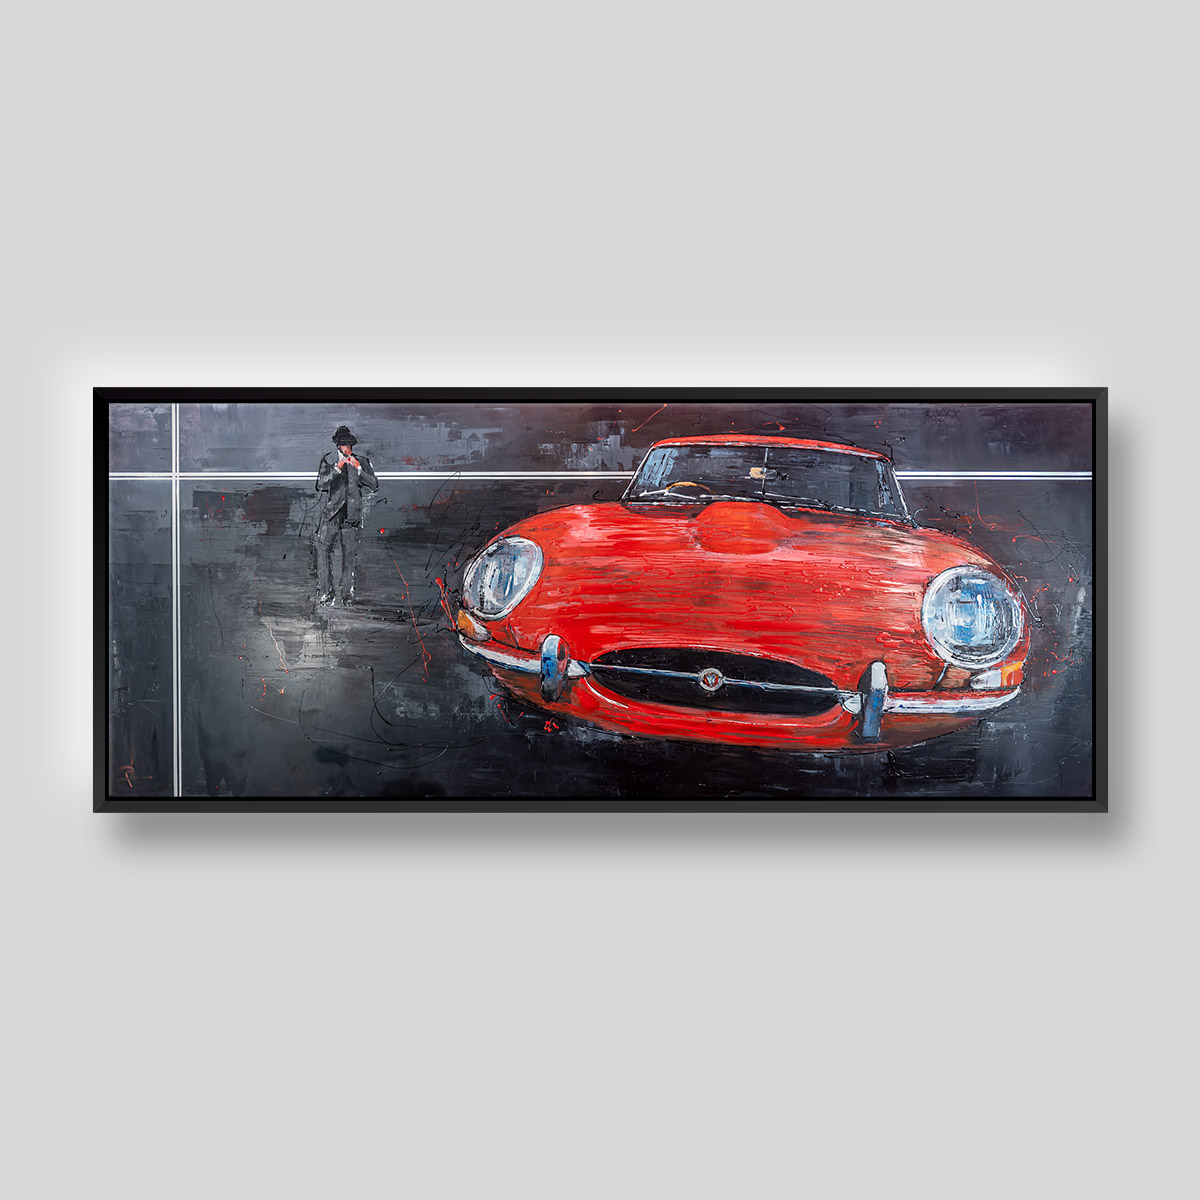 Ready and Waiting by Paul Kenton, UK Contemporary artist, an original painting from his Motorsports collection